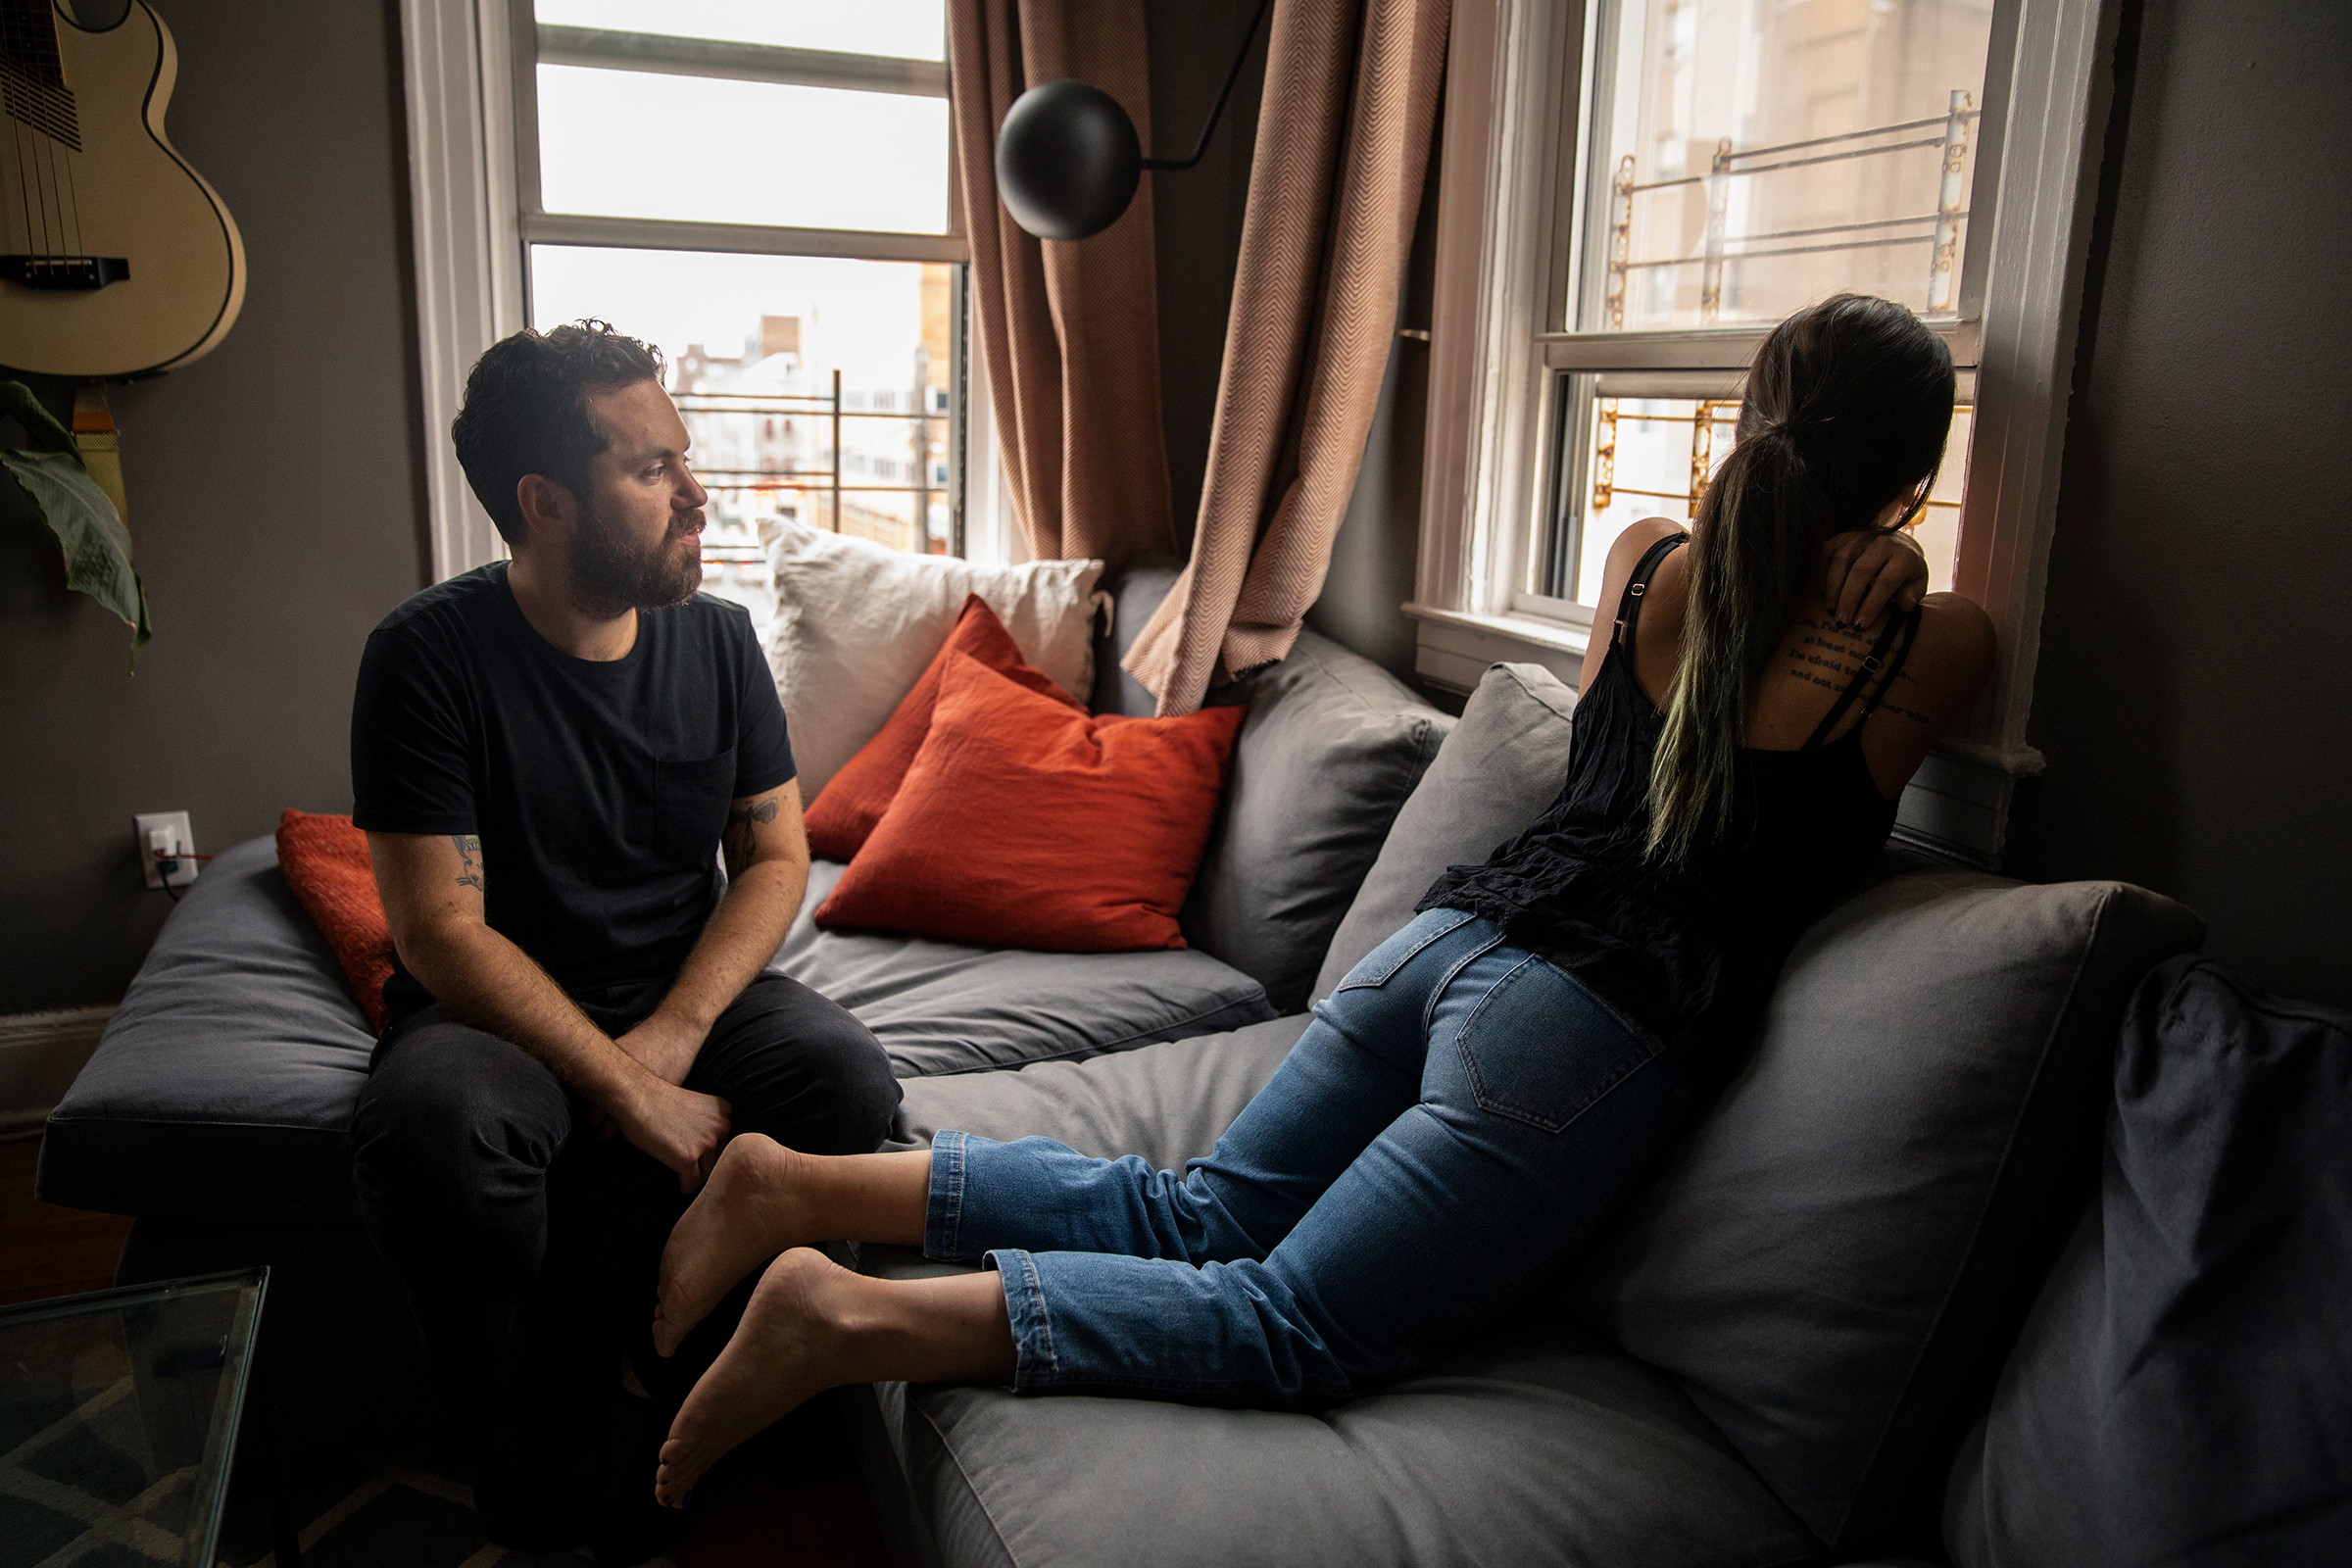 Marc Kozlow, 33, and Alix Monteleone, 28, look out their window toward Wyckoff Heights Medical Center on March 30. In one weekend, after a temporary morgue was erected outside, they counted more than a dozen bodies. "I want to know," Monteleone says, referencing the temporary morgue parked nearby. "I want to know the body count." (Benjamin Norman for TIME)